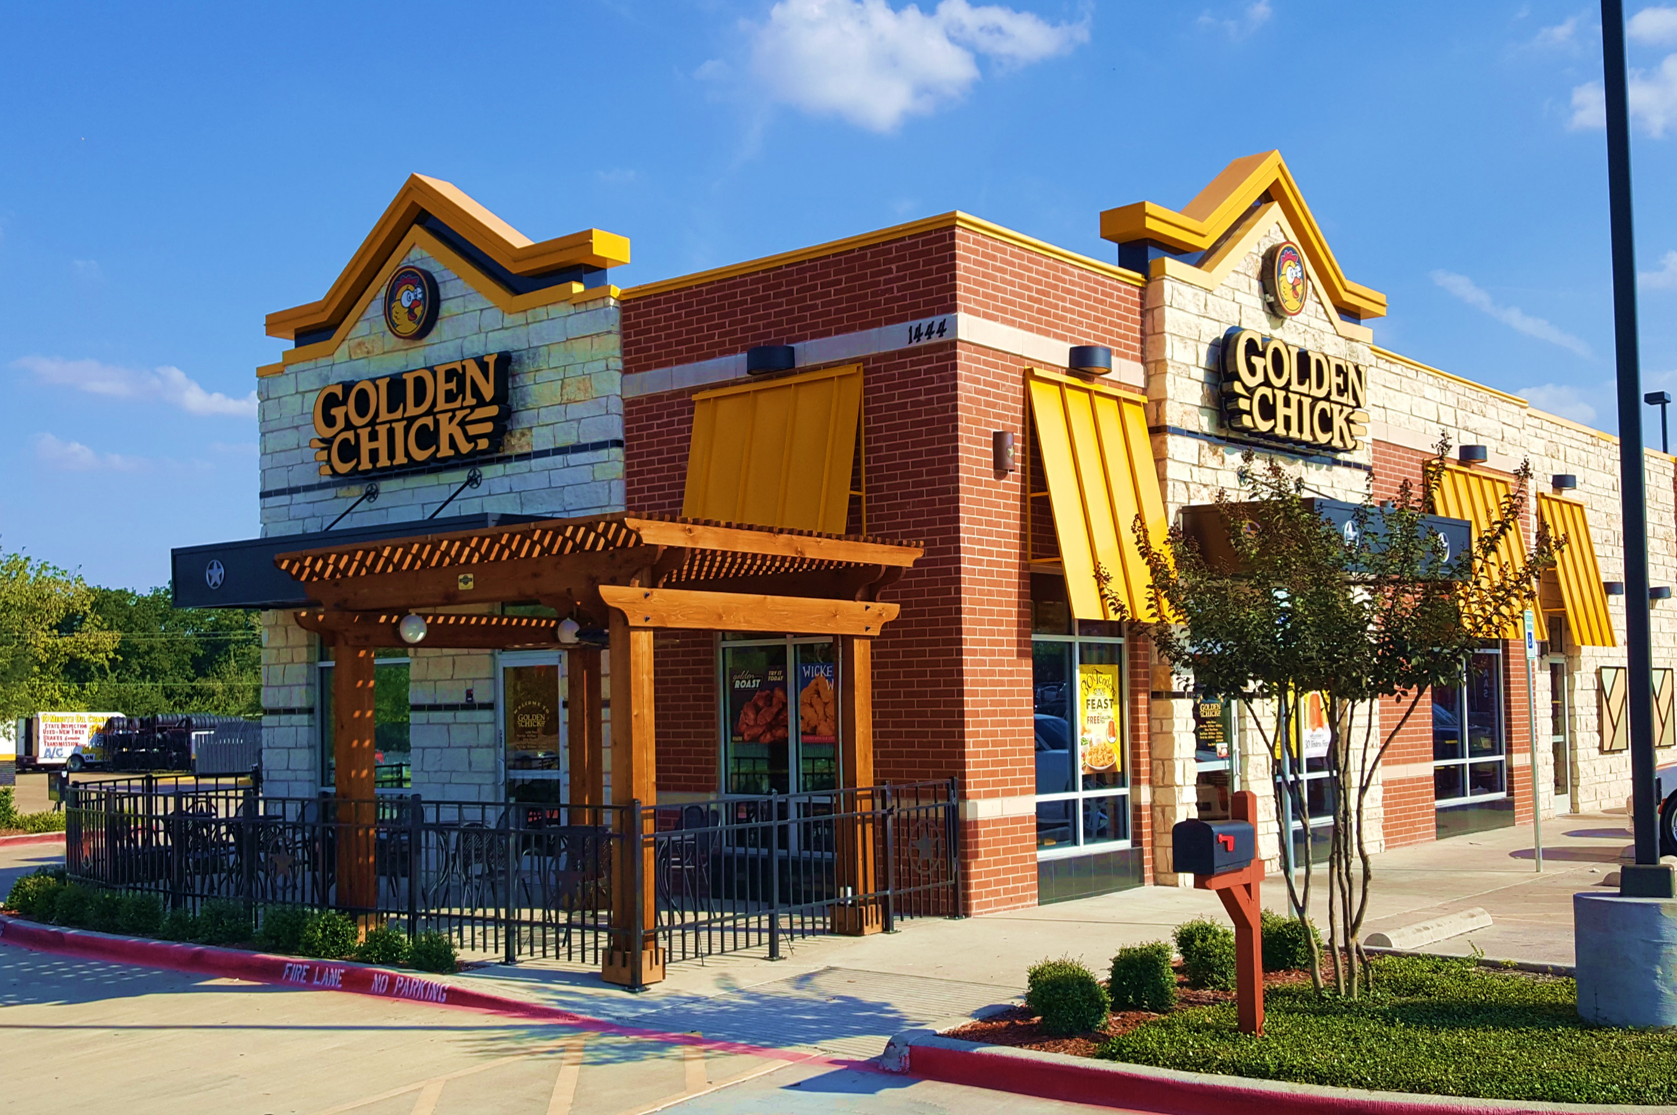 Golden Chick storefront.  Your local Golden Chick fast food restaurant in Lancaster, Texas